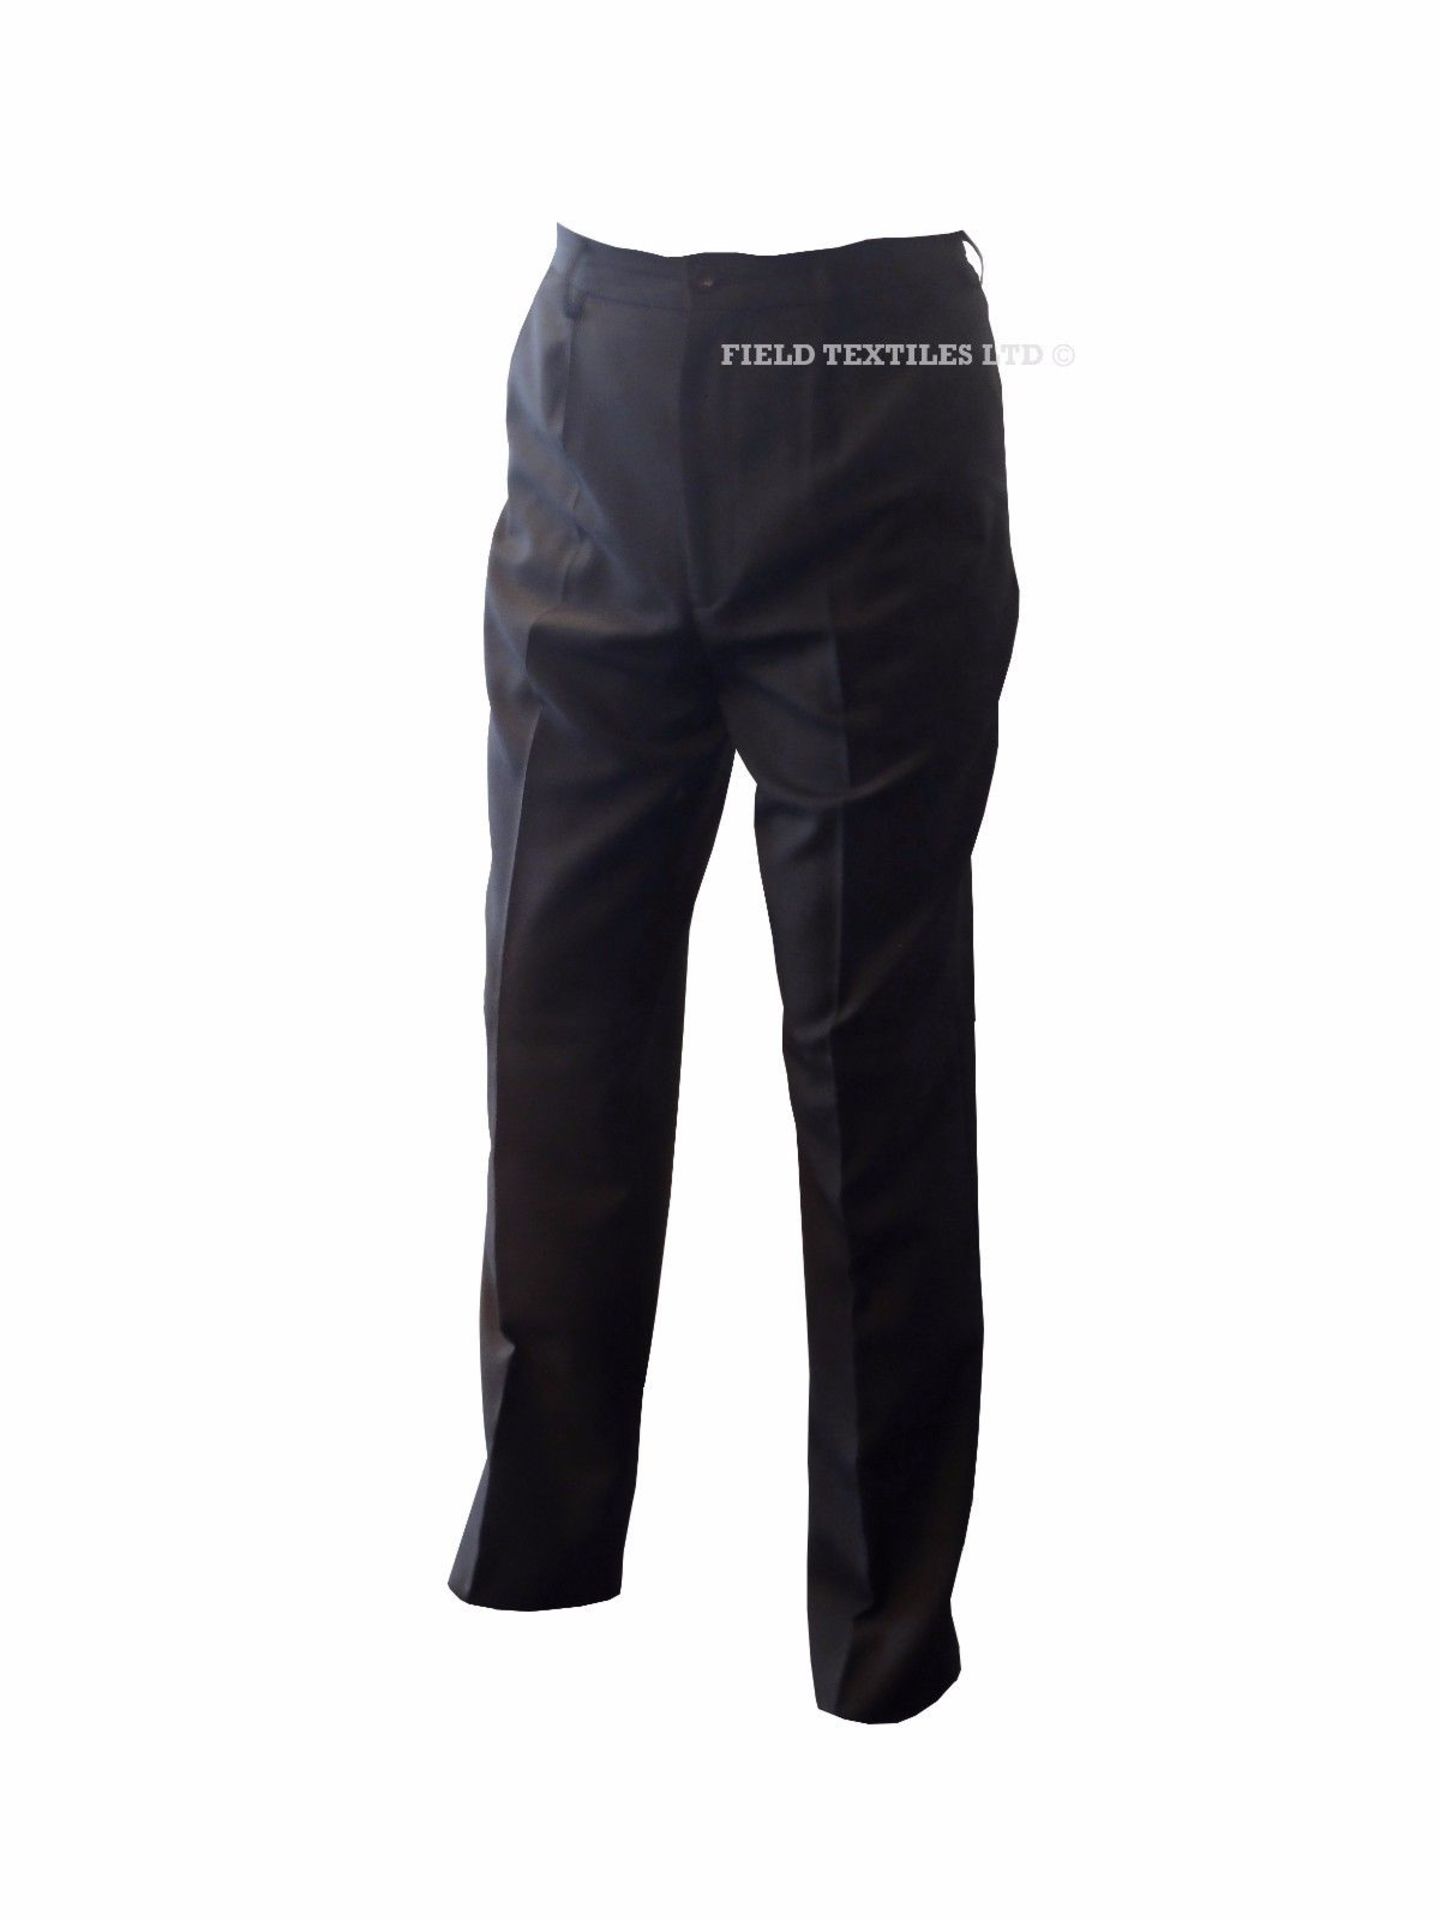 Pack of 10 - Black Uniform Trousers - New - Mix of Sizes